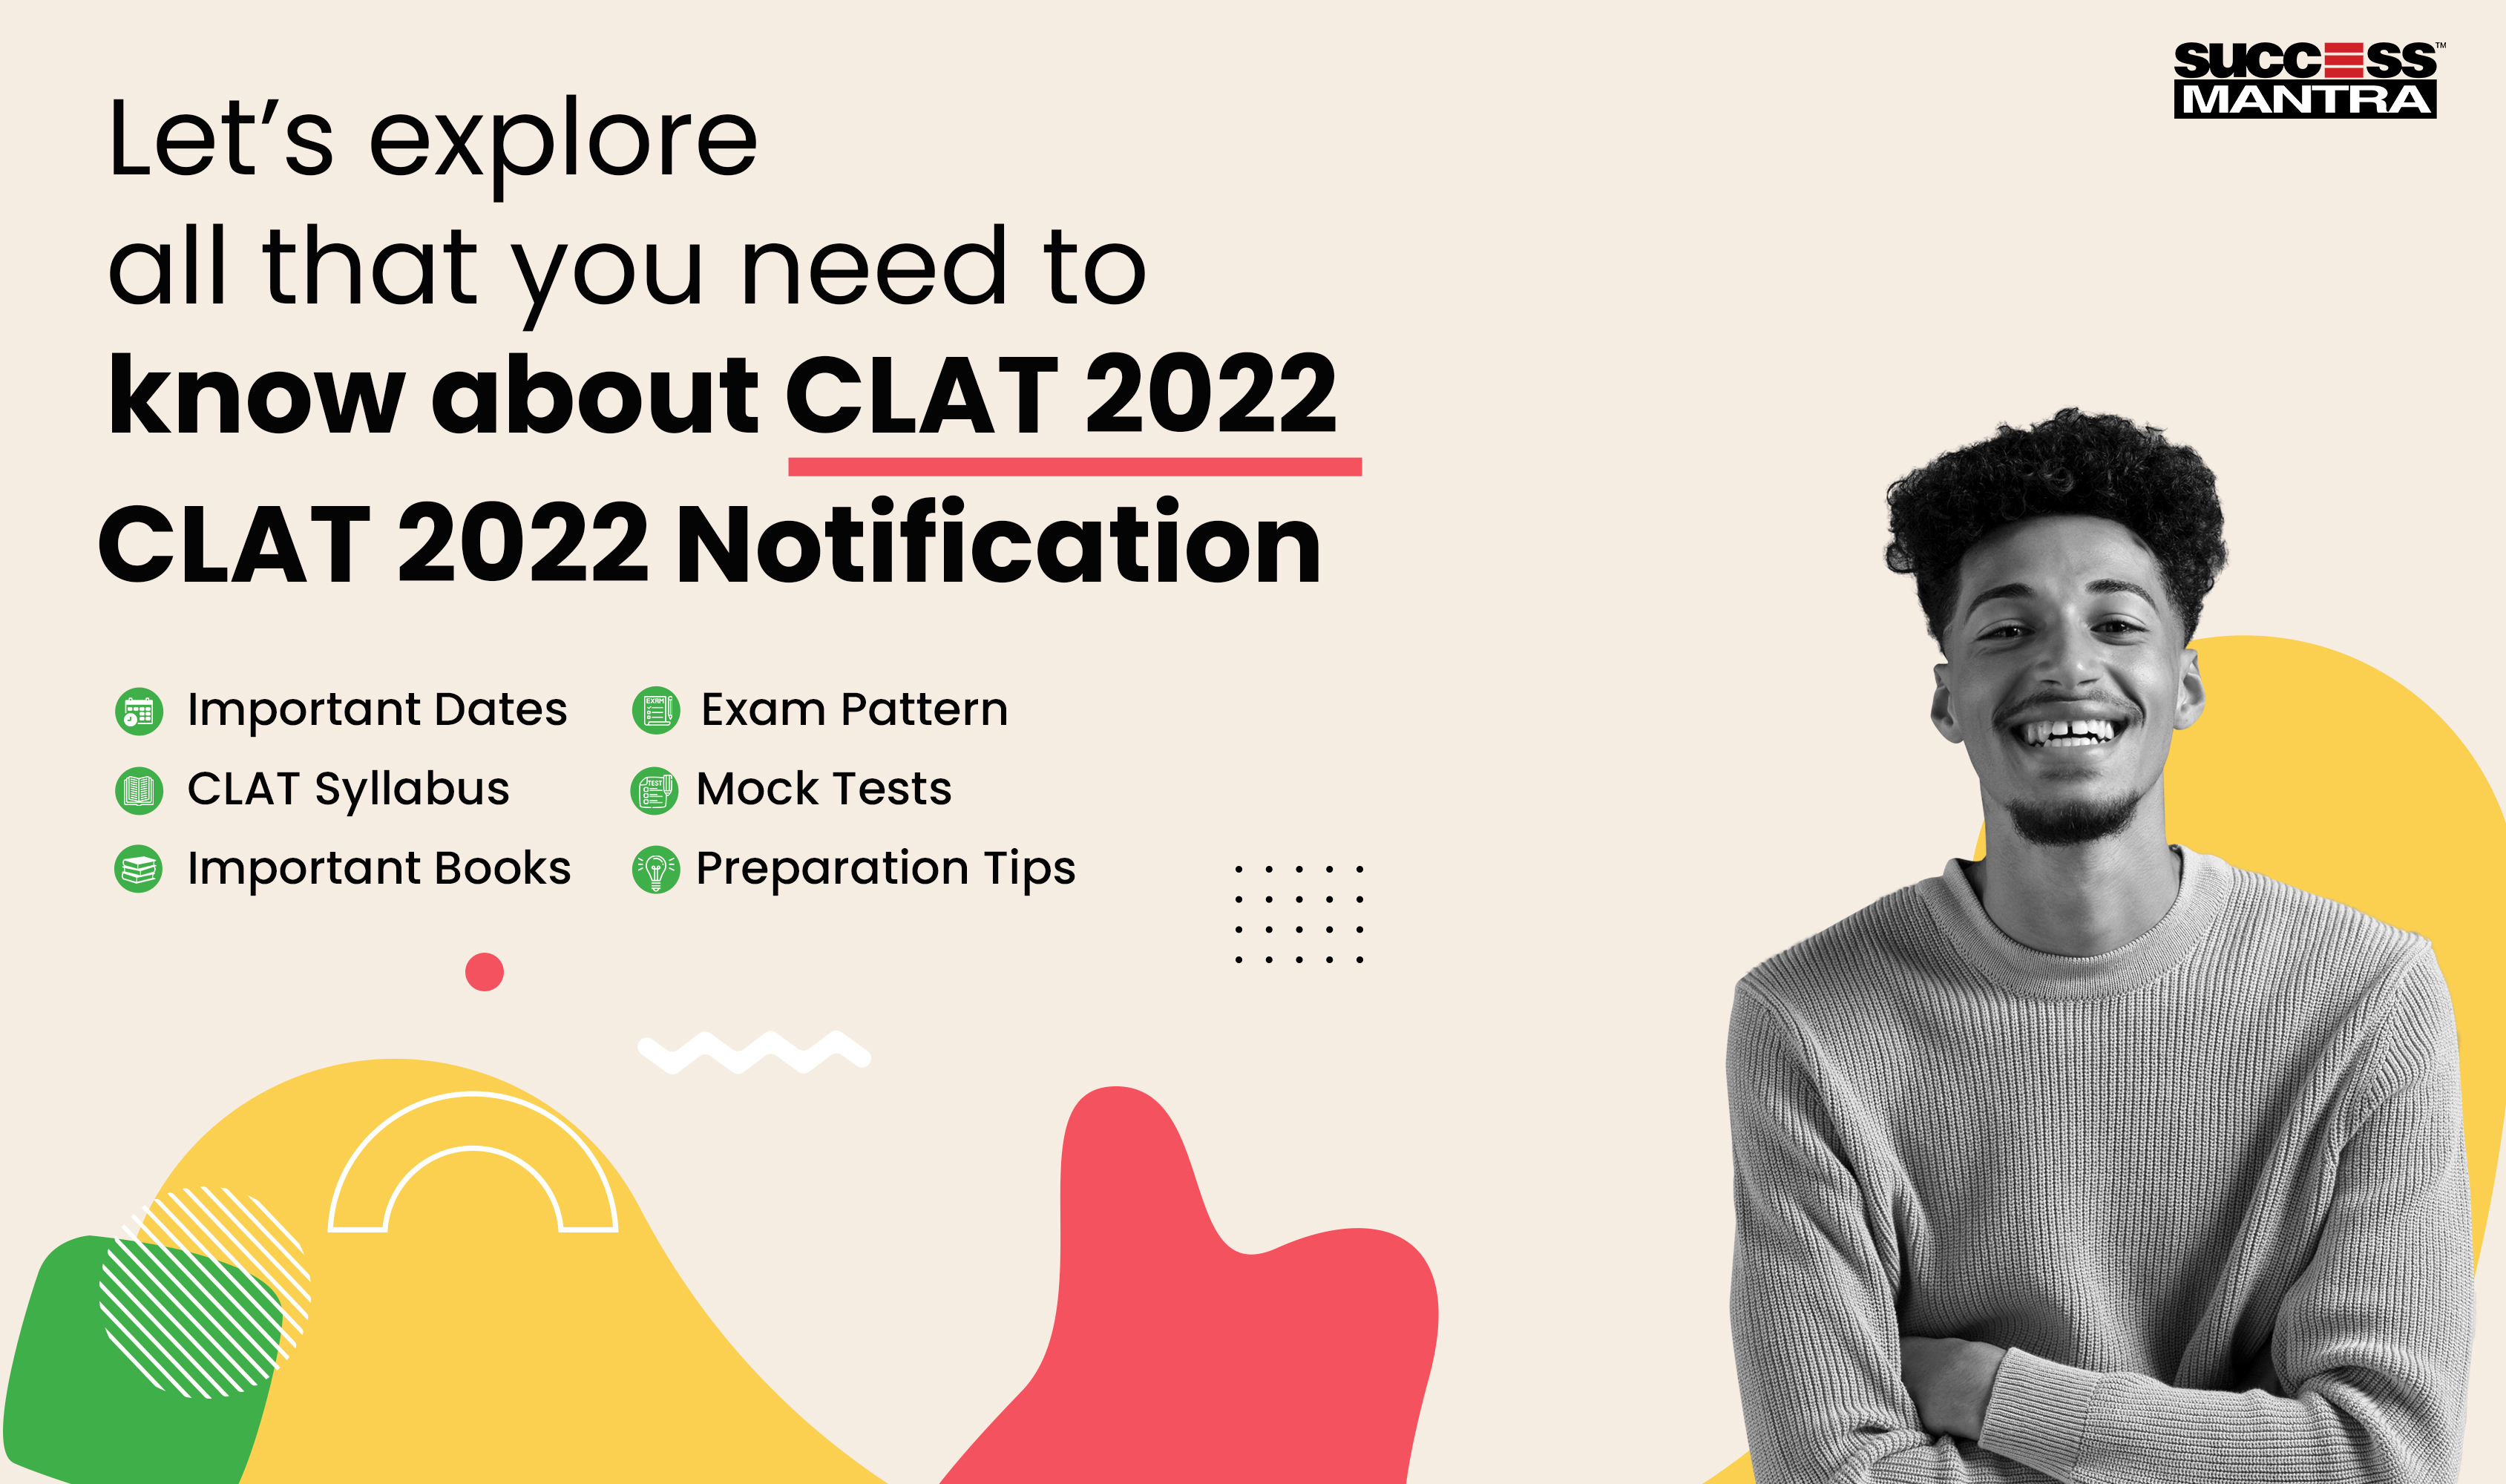 Let’s explore all that you need to know about CLAT 2022, Success Mantra Best CLAT Coaching in Delhi